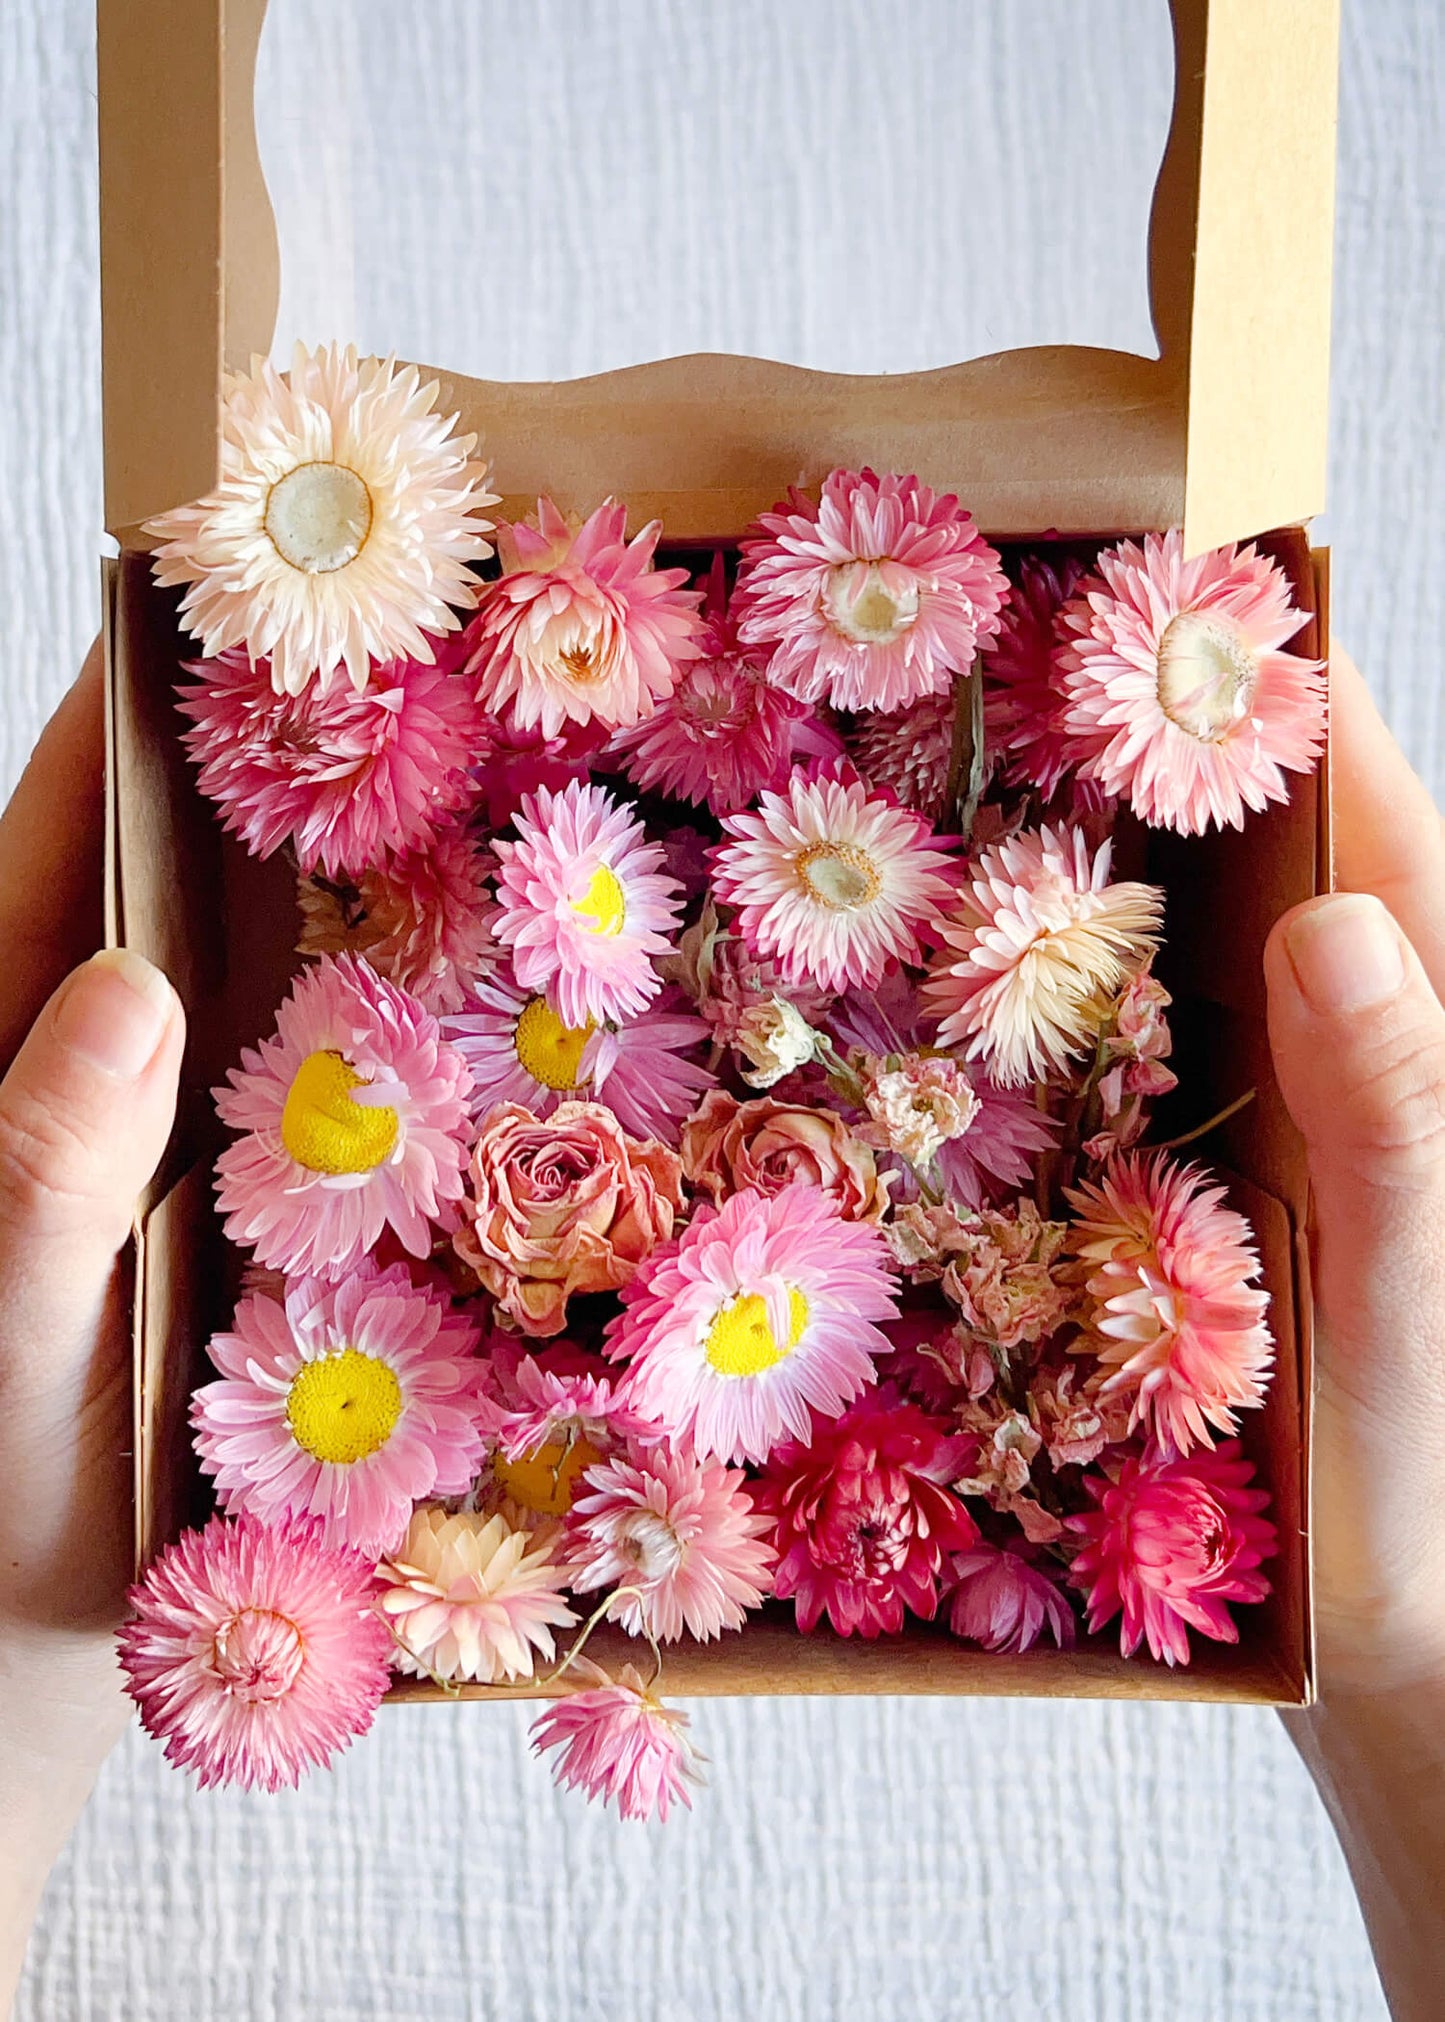 Dried flowers for cakes in various pink hues